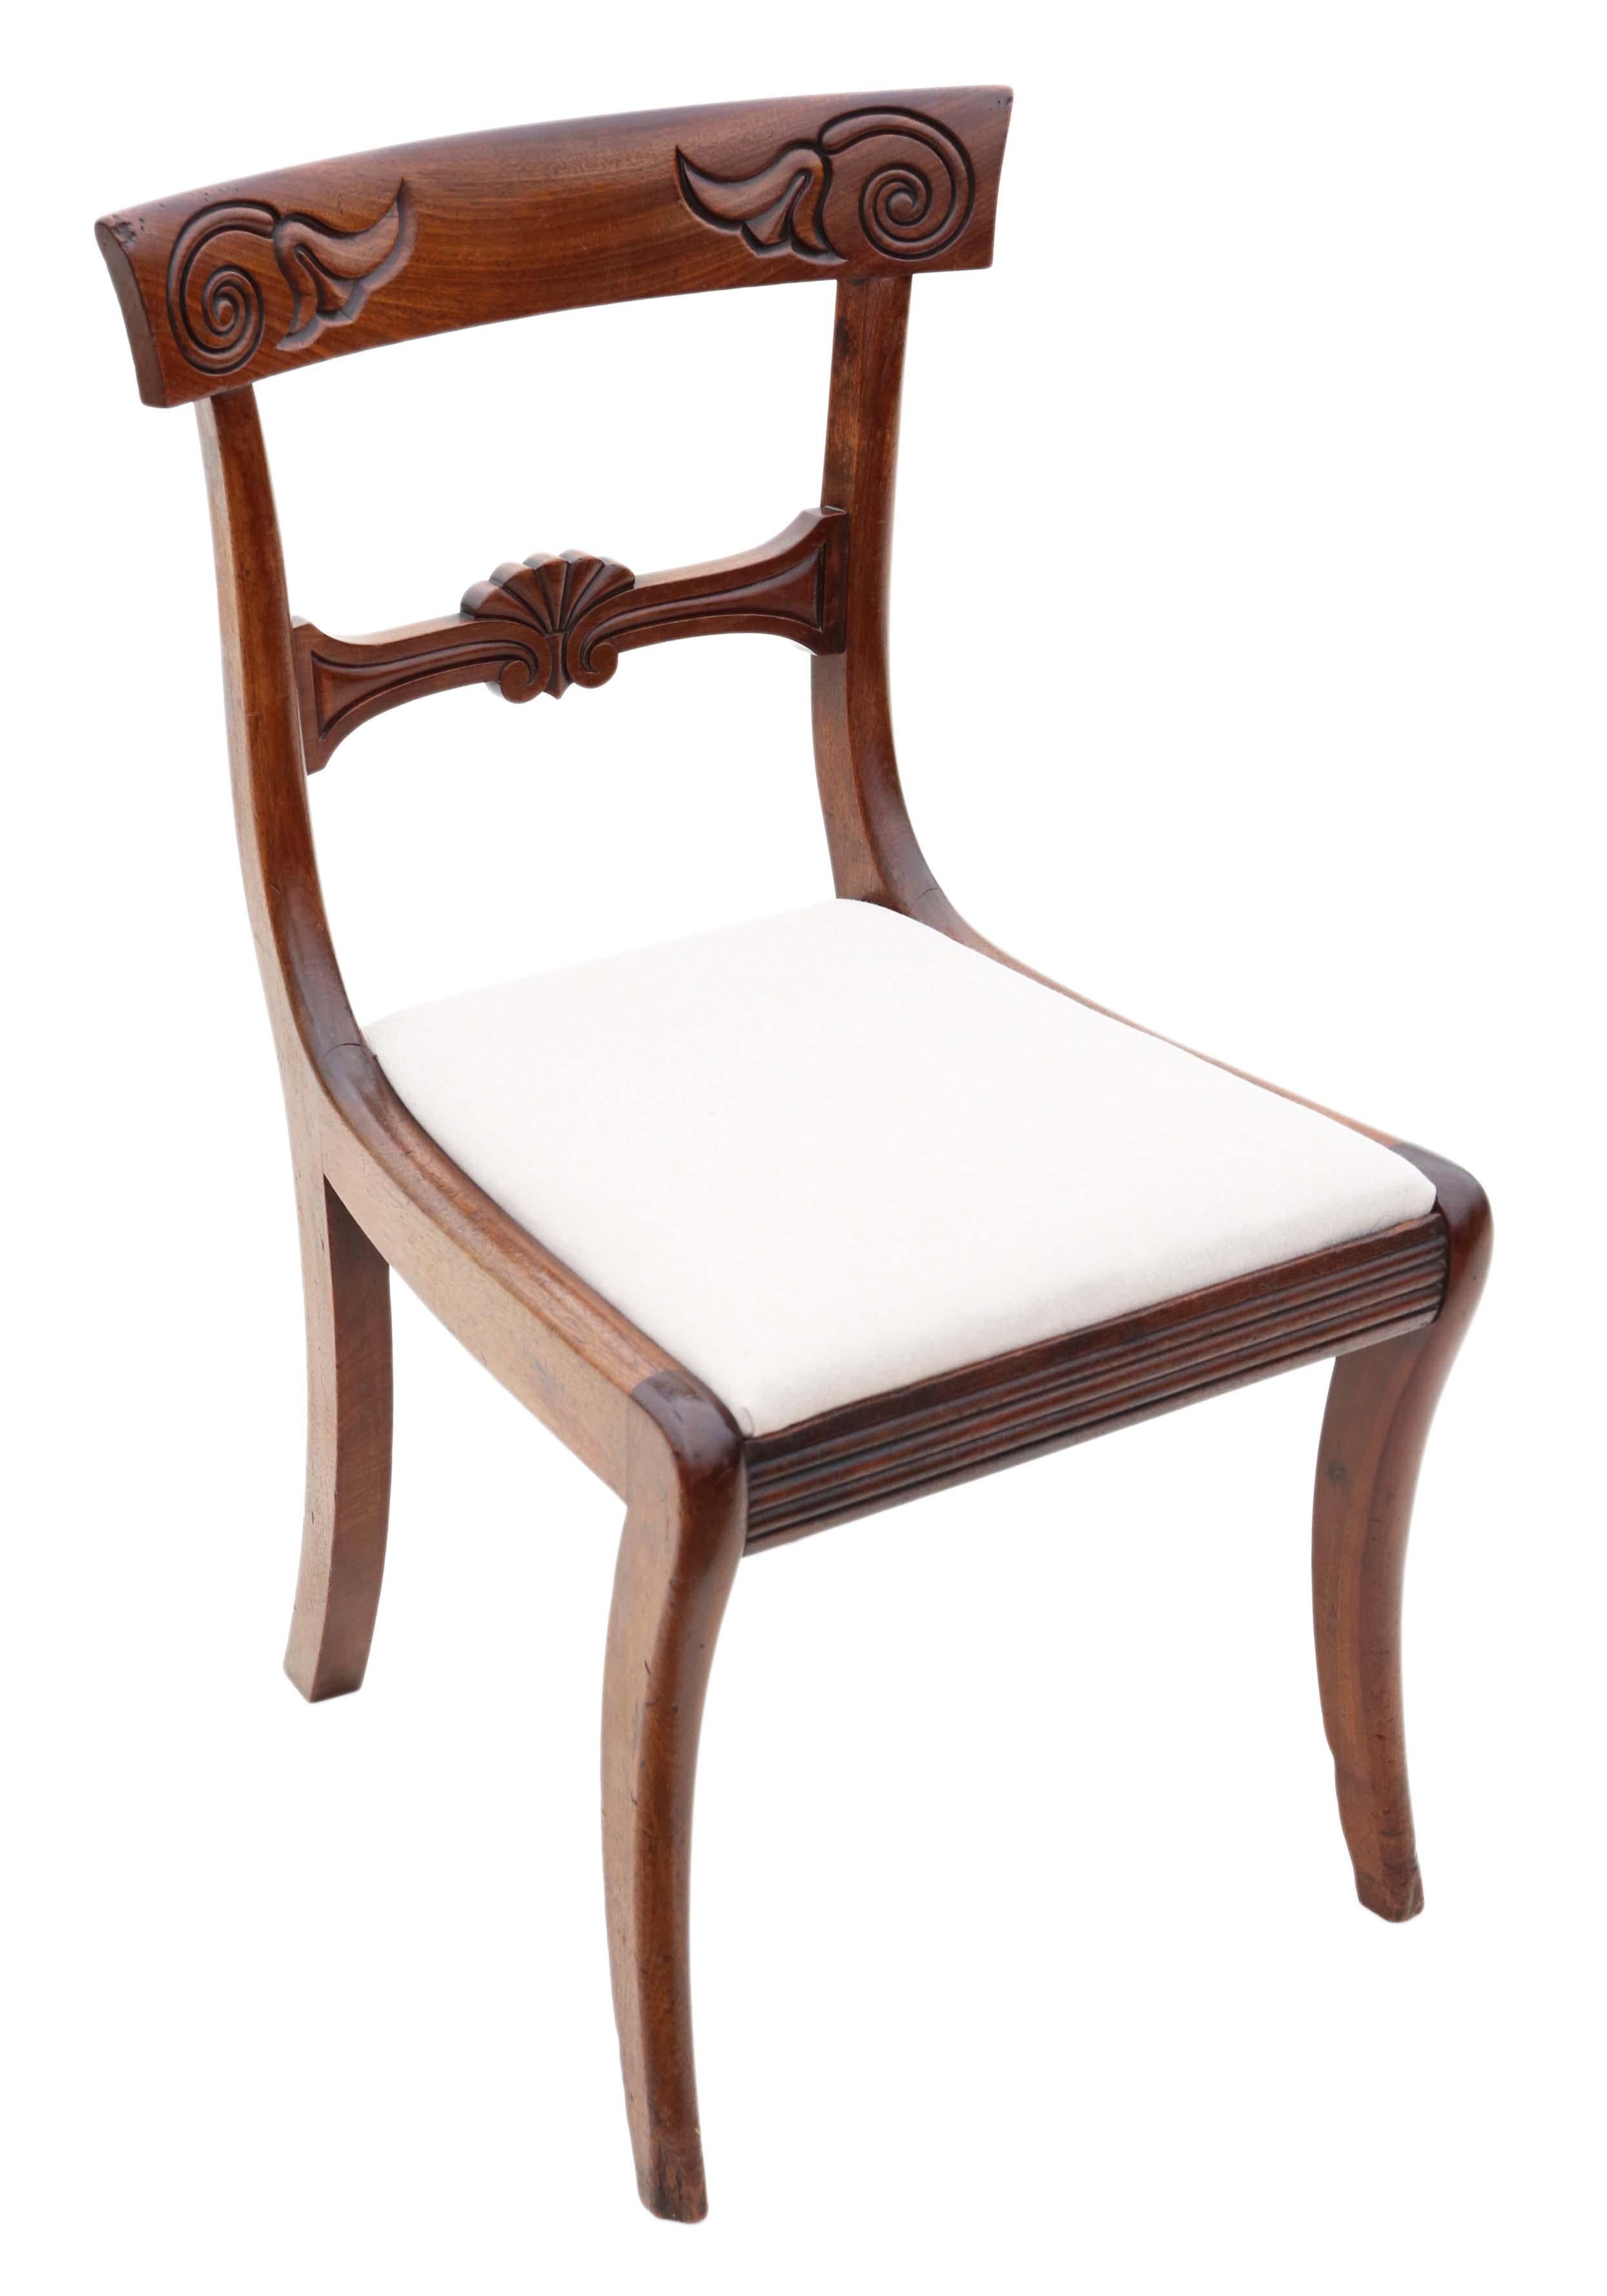 Regency Cuban Mahogany Dining Chairs: Set of 6 (4+2), Antique Quality, C1825 For Sale 10